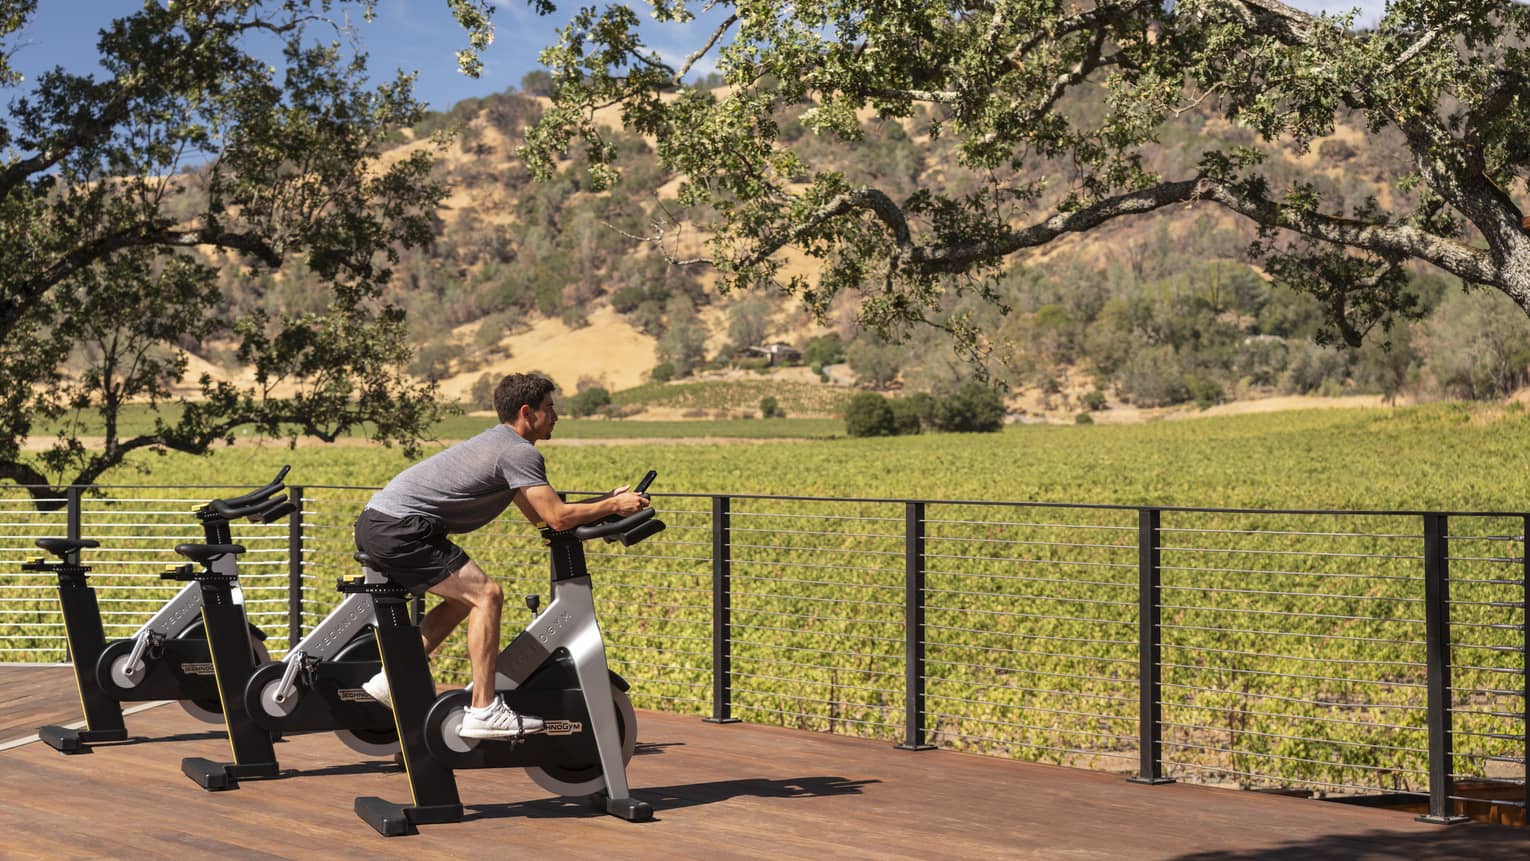 Man using a stationary bike outdoors surrounded by nature.